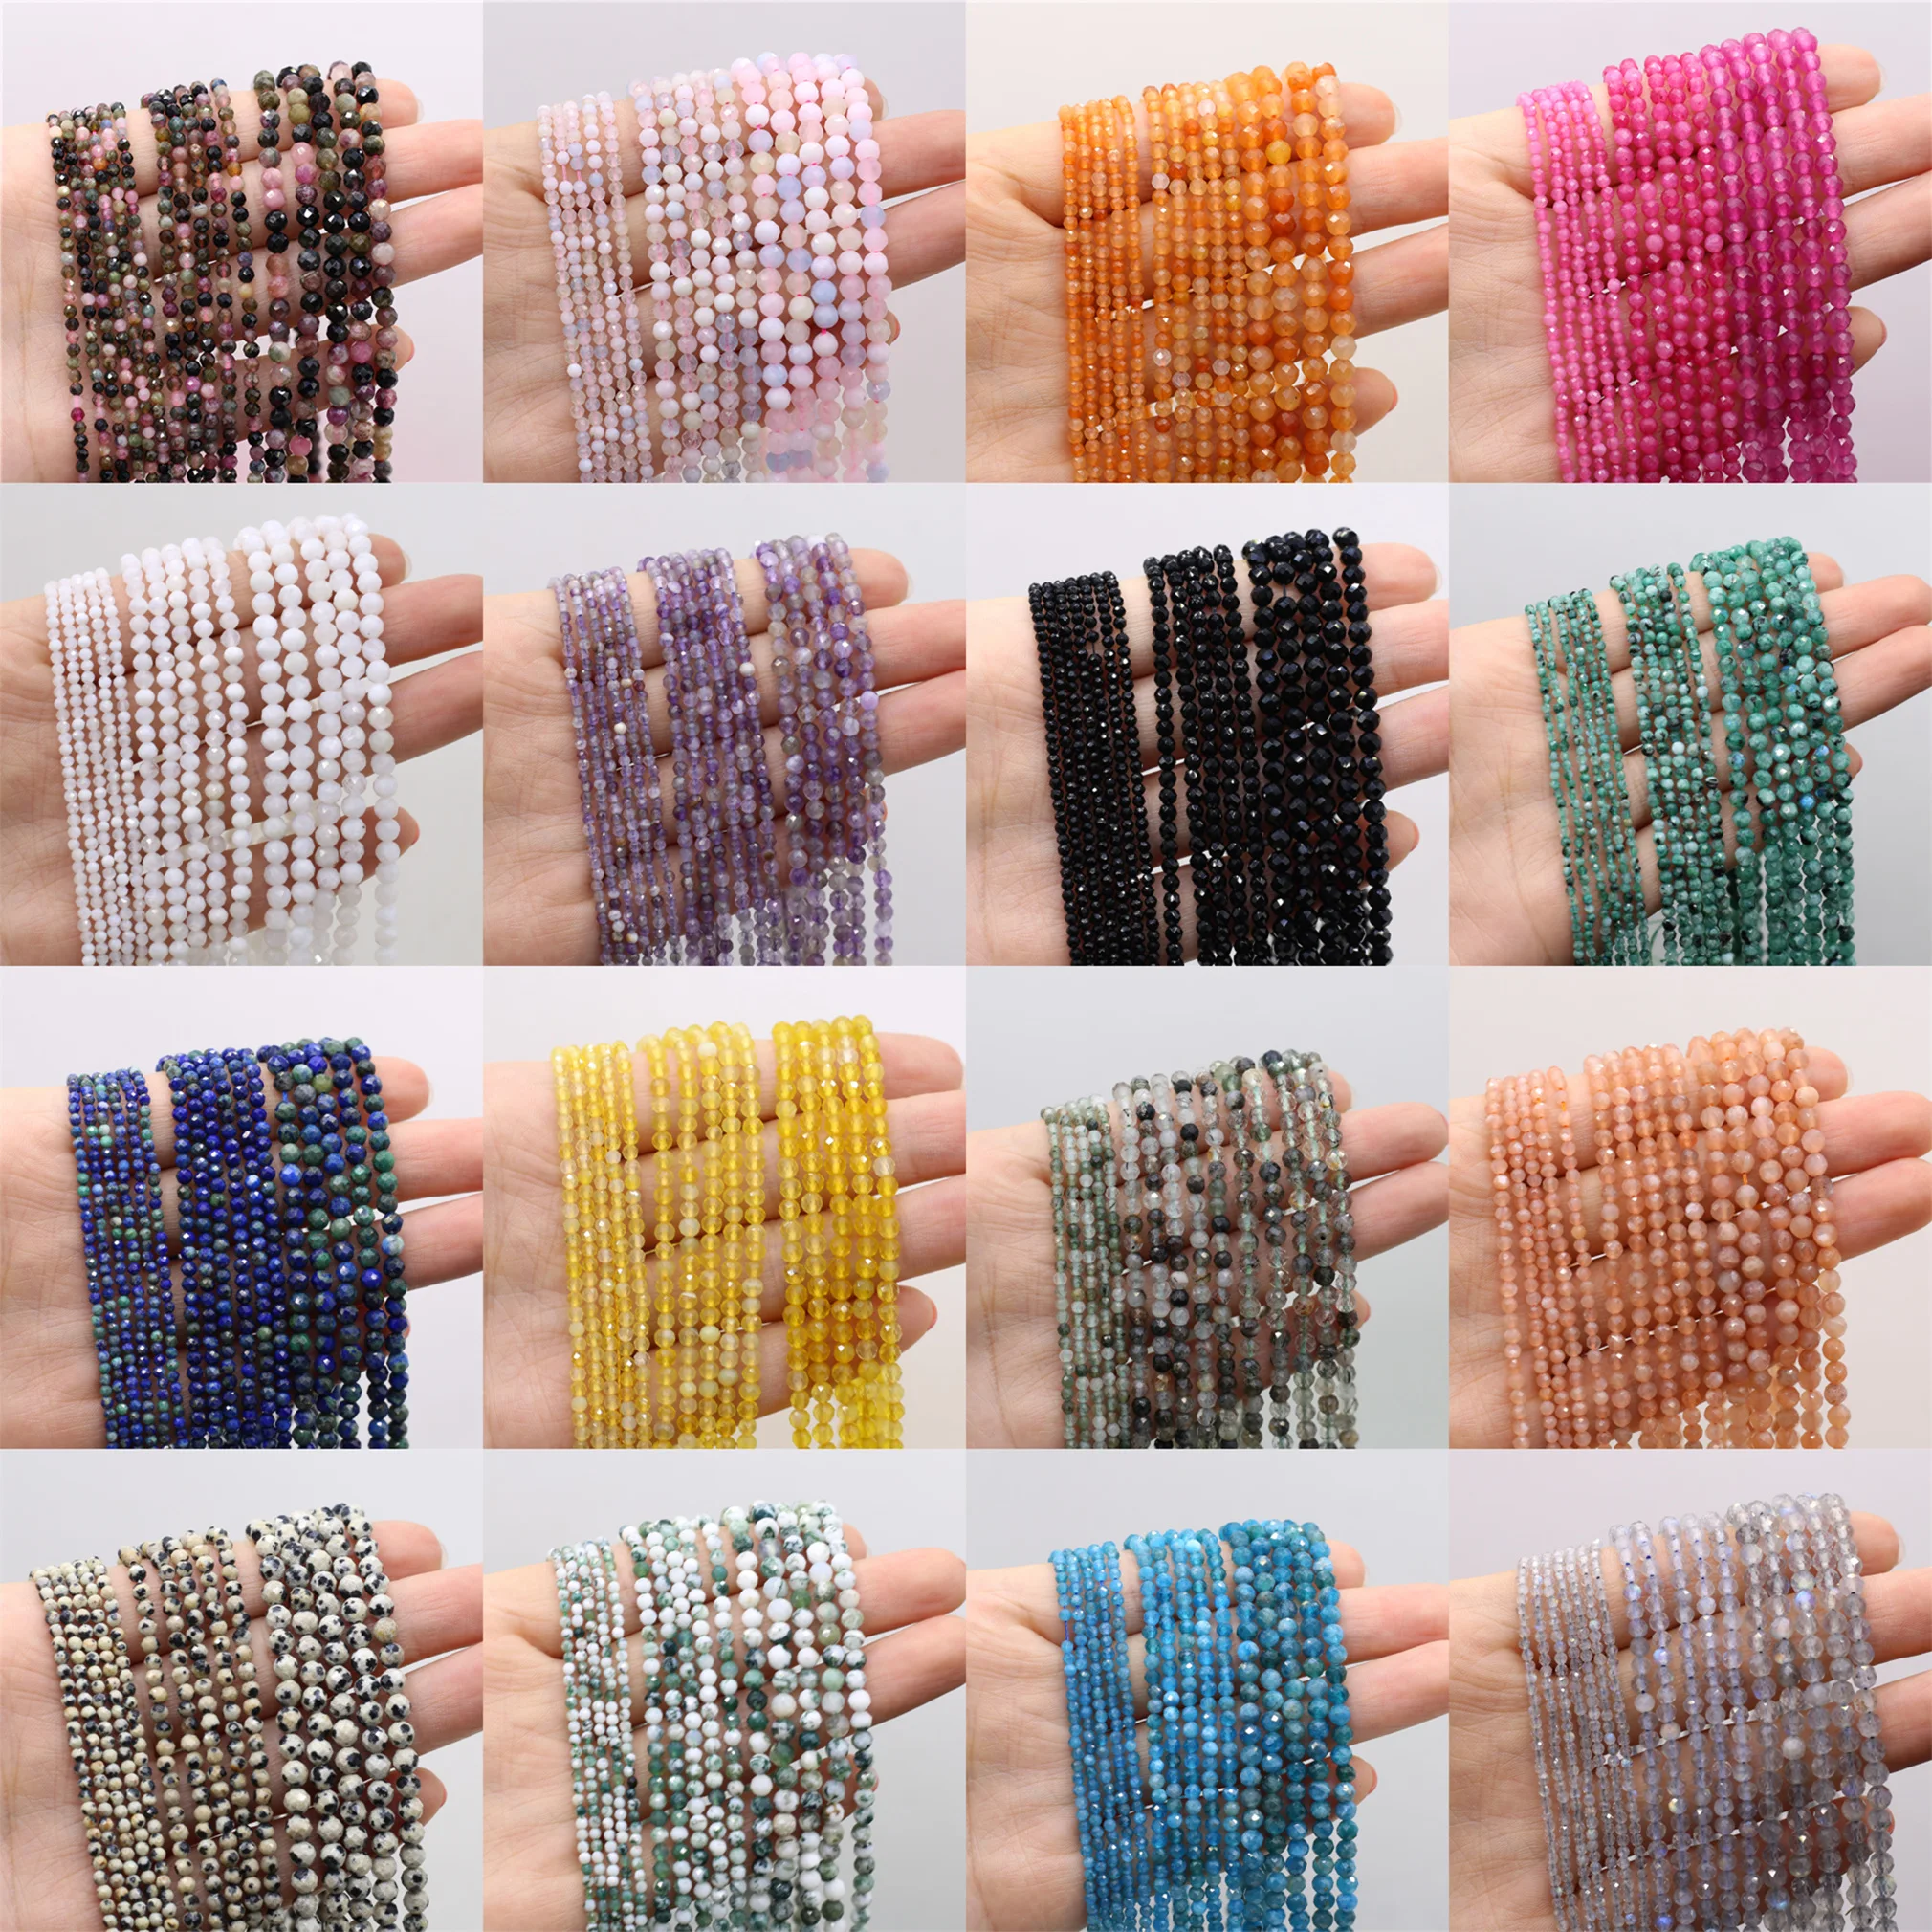 

2/3/4mm Natural Stone Faceted Beads Charms Crystals Small Round Loose Spacer Beads For Jewelry Making DIY Bracelets Necklaces